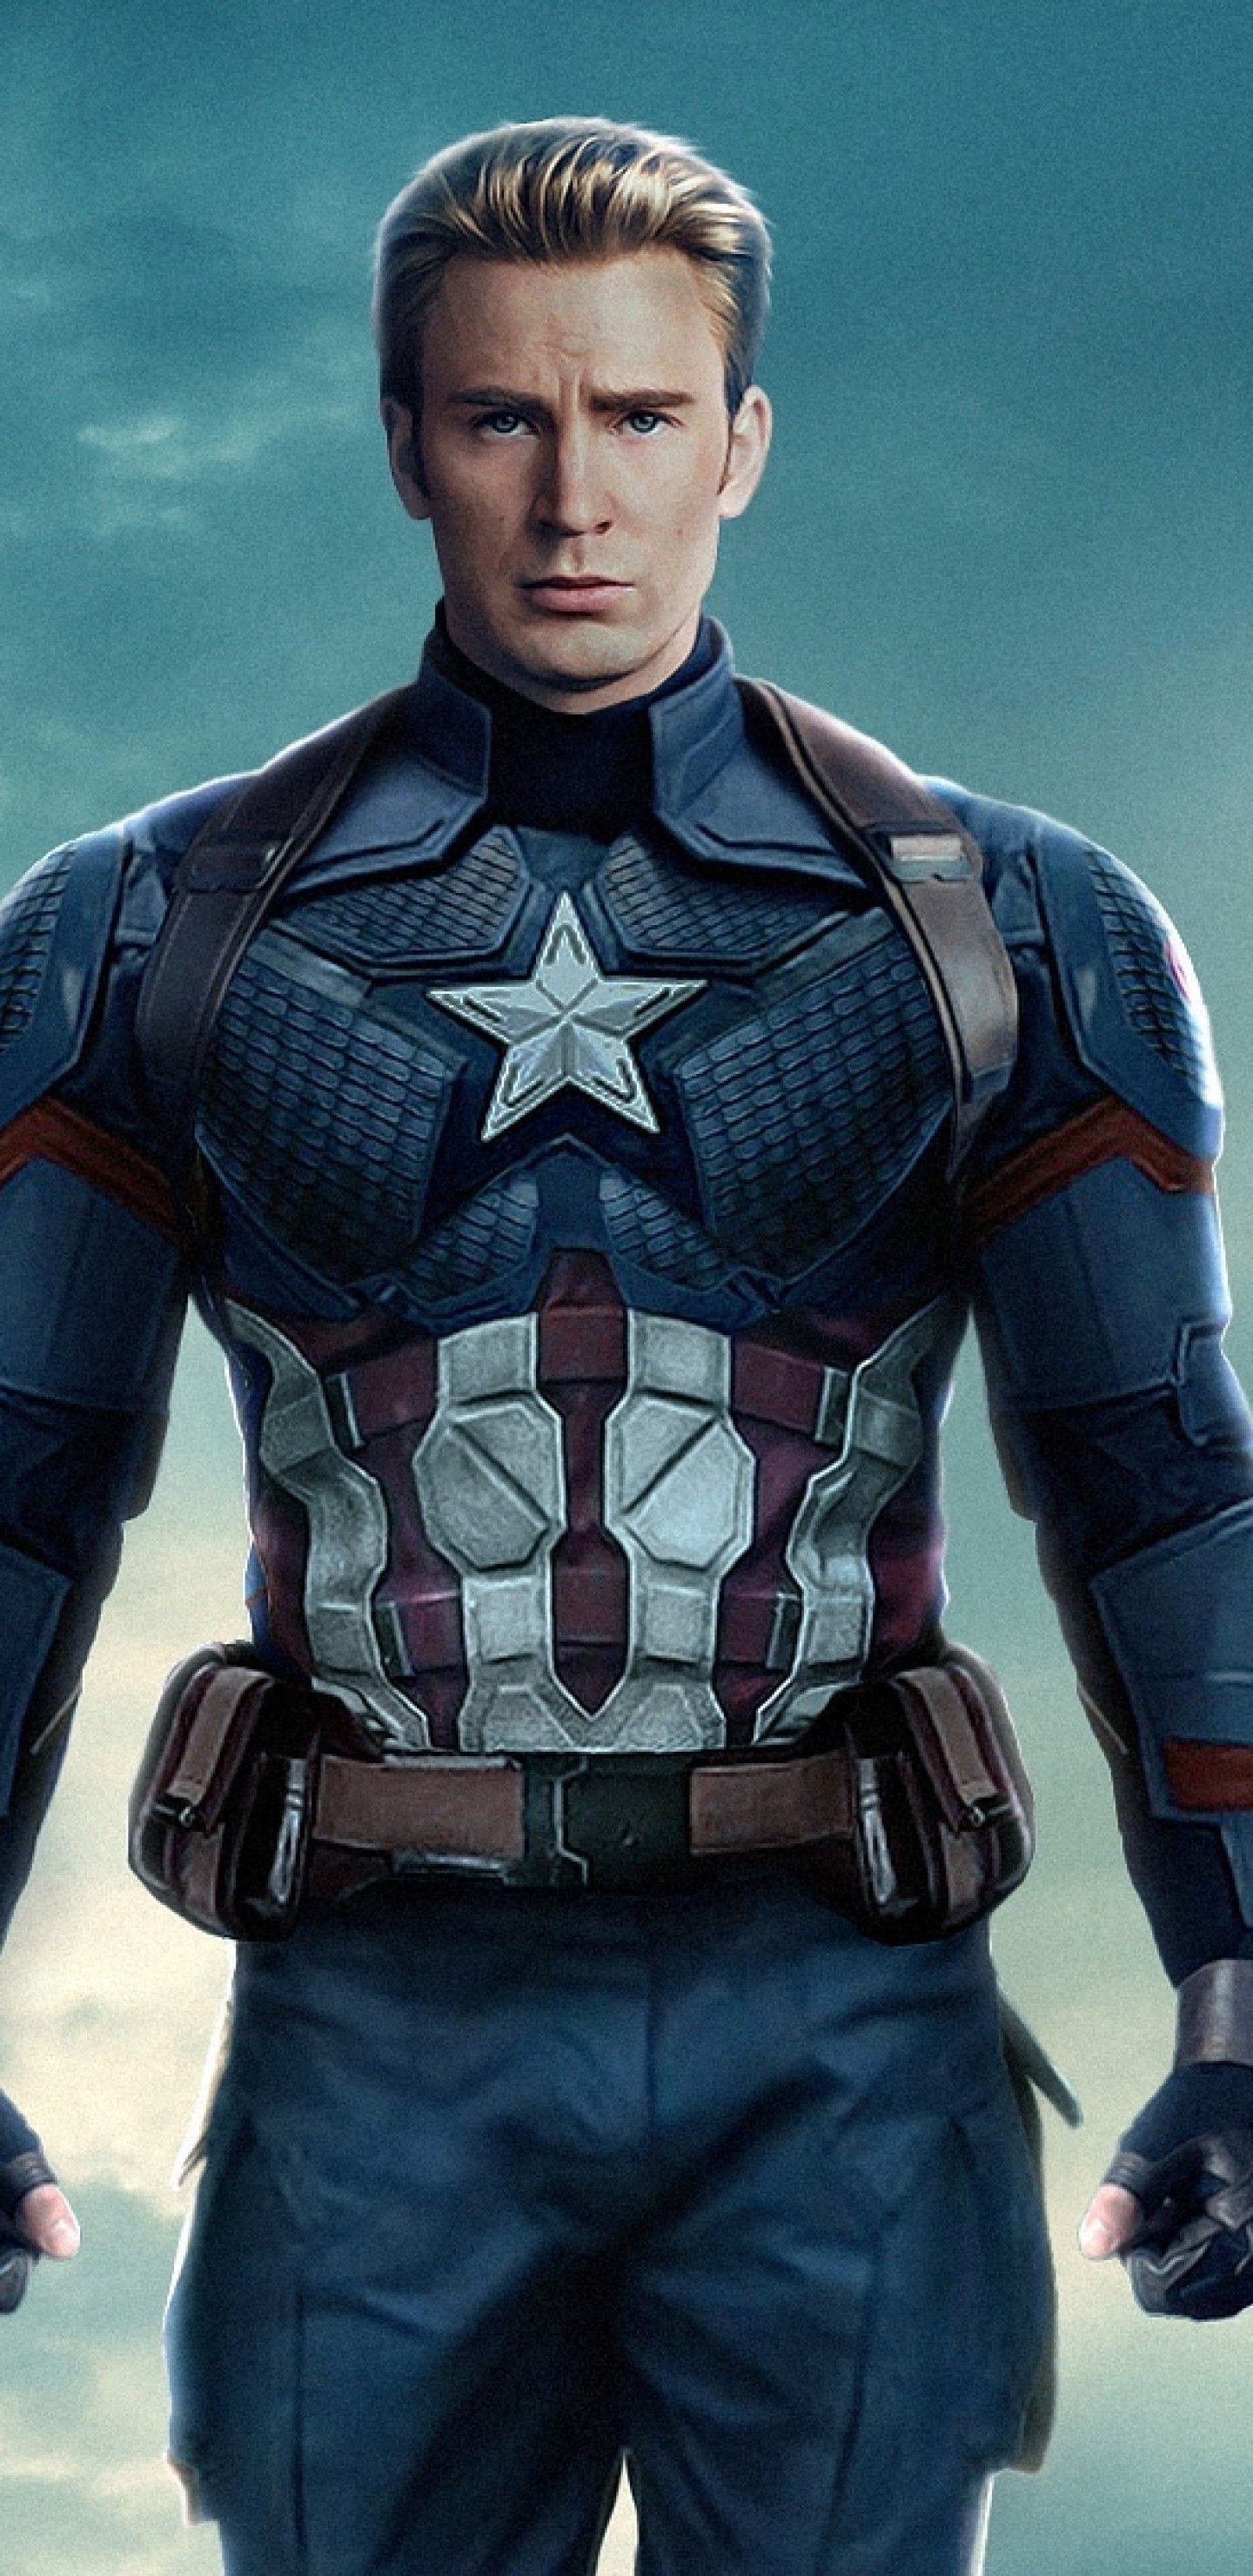 Download 1440x2960 Captain America: The Winter Soldier, Chris Evans Wallpaper for Samsung Galaxy S Note S S8+, Google Pixel 3 XL